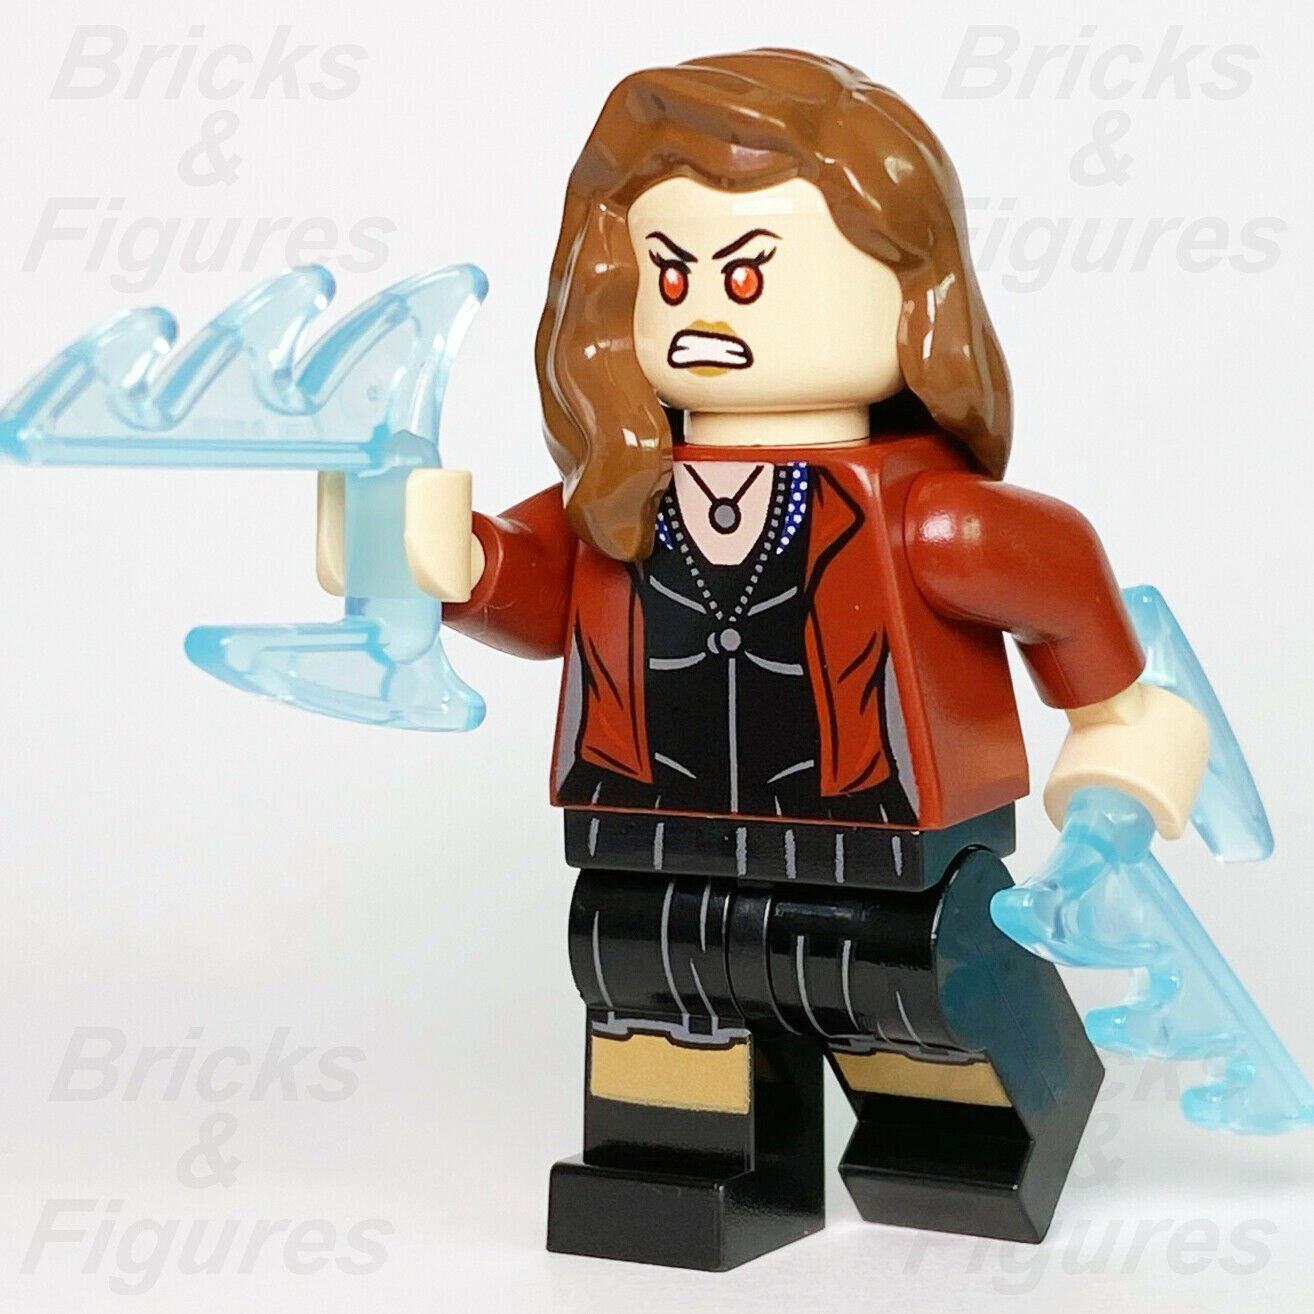 Marvel Super Heroes LEGO Scarlet Witch Avengers Age of Ultron Minifigure 76031 - Bricks & Figures